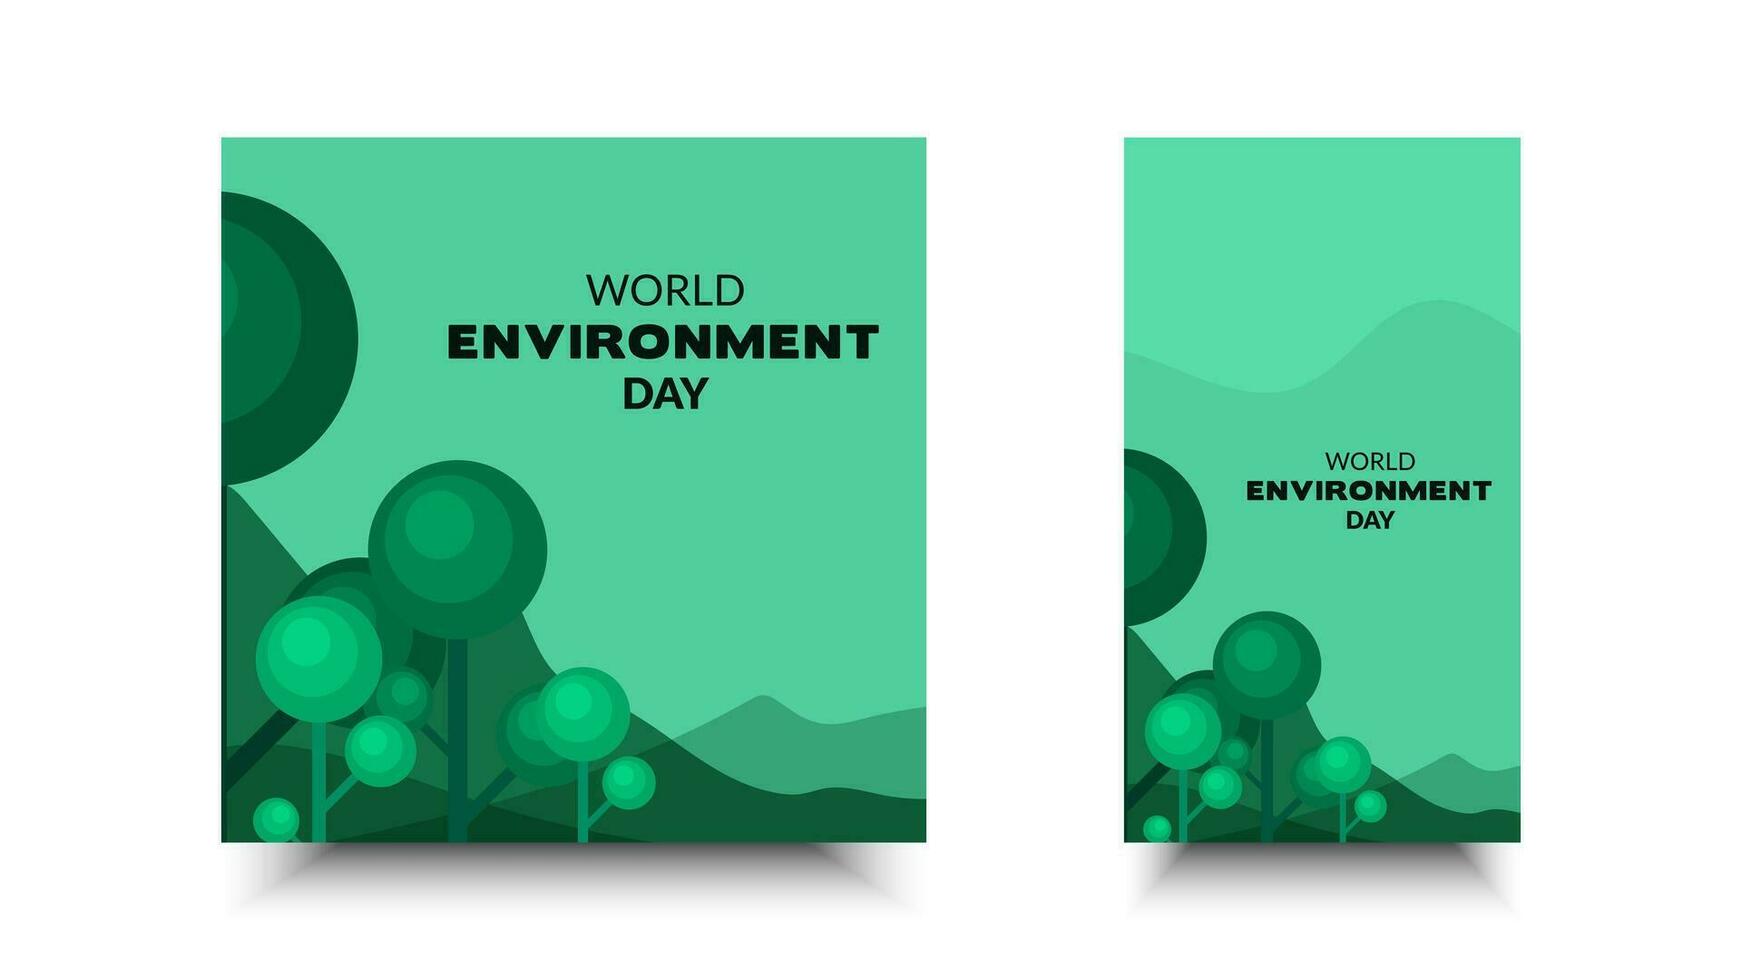 world environment day. Vector design for environmental sustainability education for banners, backgrounds, posters, social media